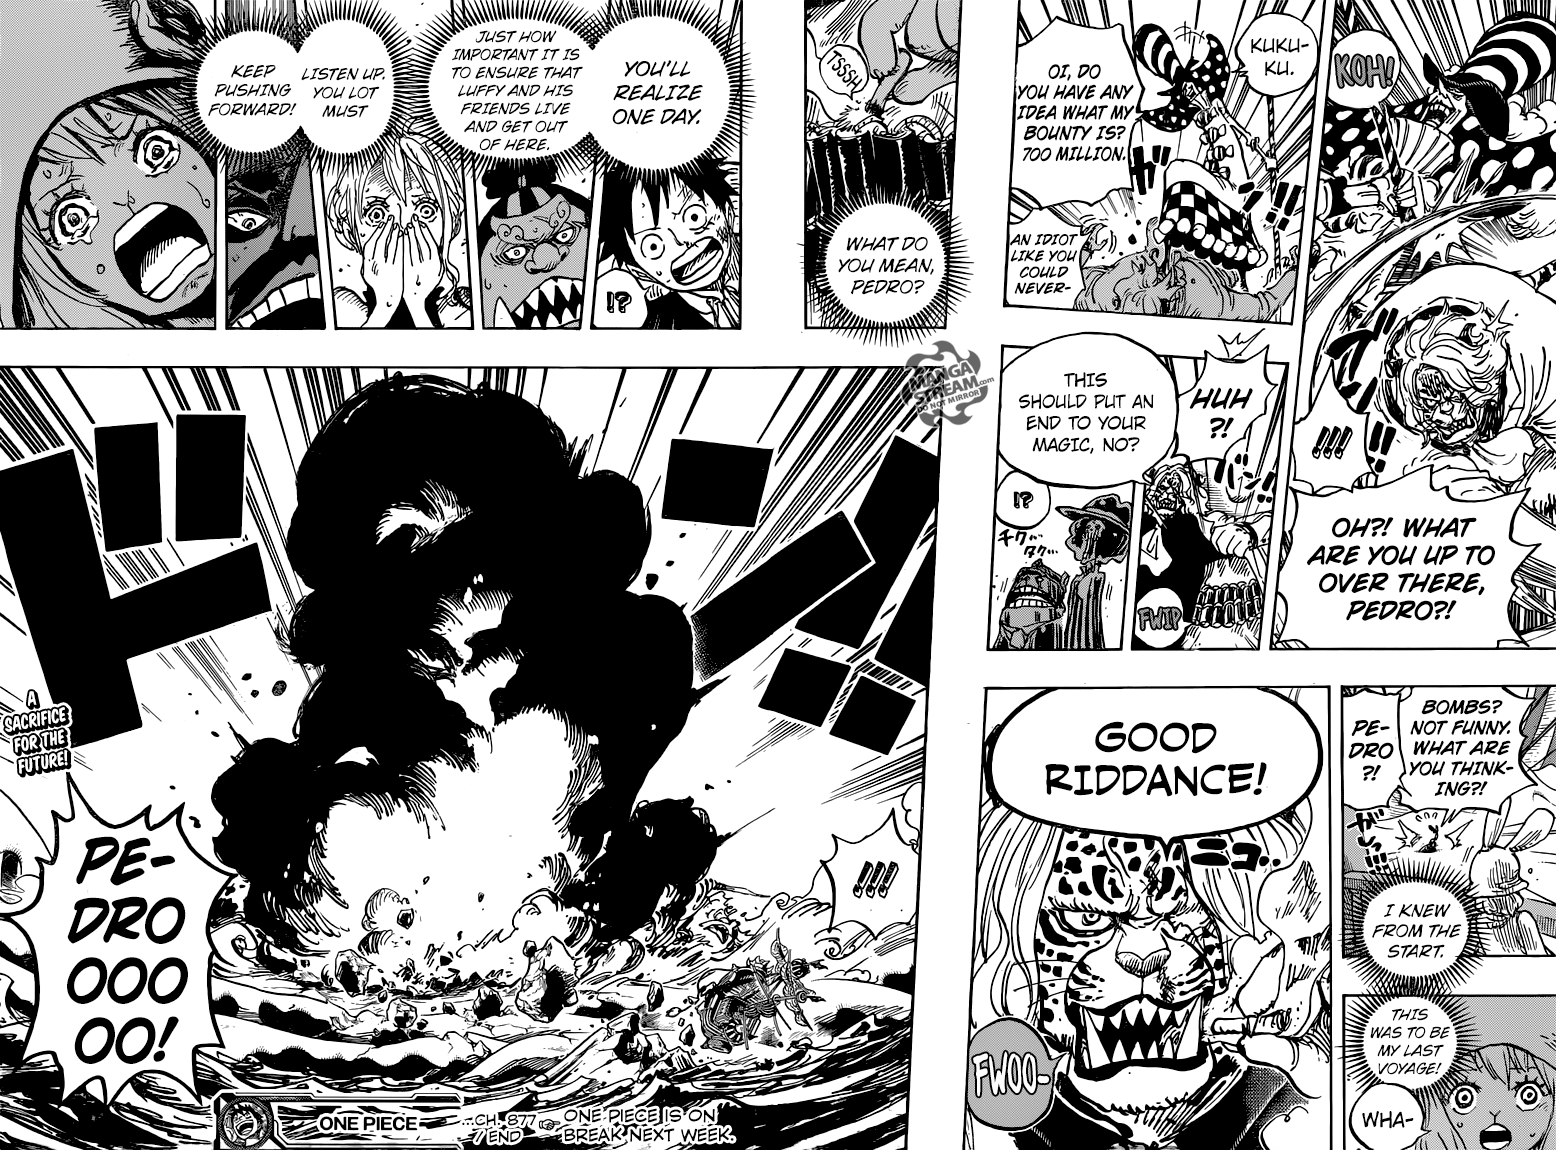 One Piece Episode 878 story